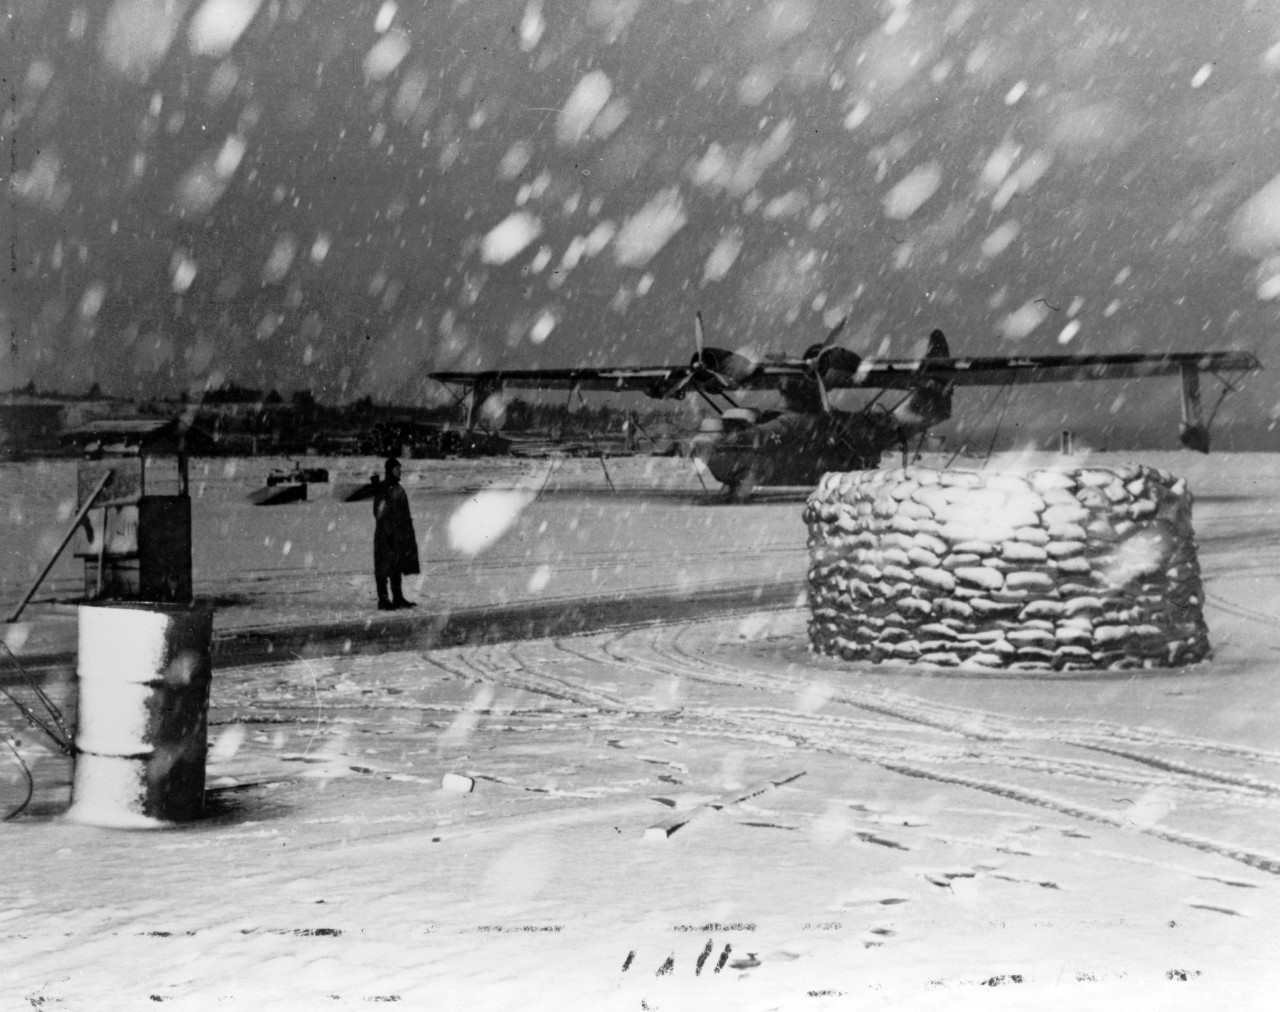 LC-USZ62-105160:  PBY-5 “Catalina” Aircraft, 1942.    Photographed during a snowstorm at Kodiak, Alaska, March 20, 1942.  Official U.S. Navy photograph.  Donated by J. Spagnola.   Photographed through Mylar sleeve. Courtesy of the Library of Congress.  (2015/10/09)